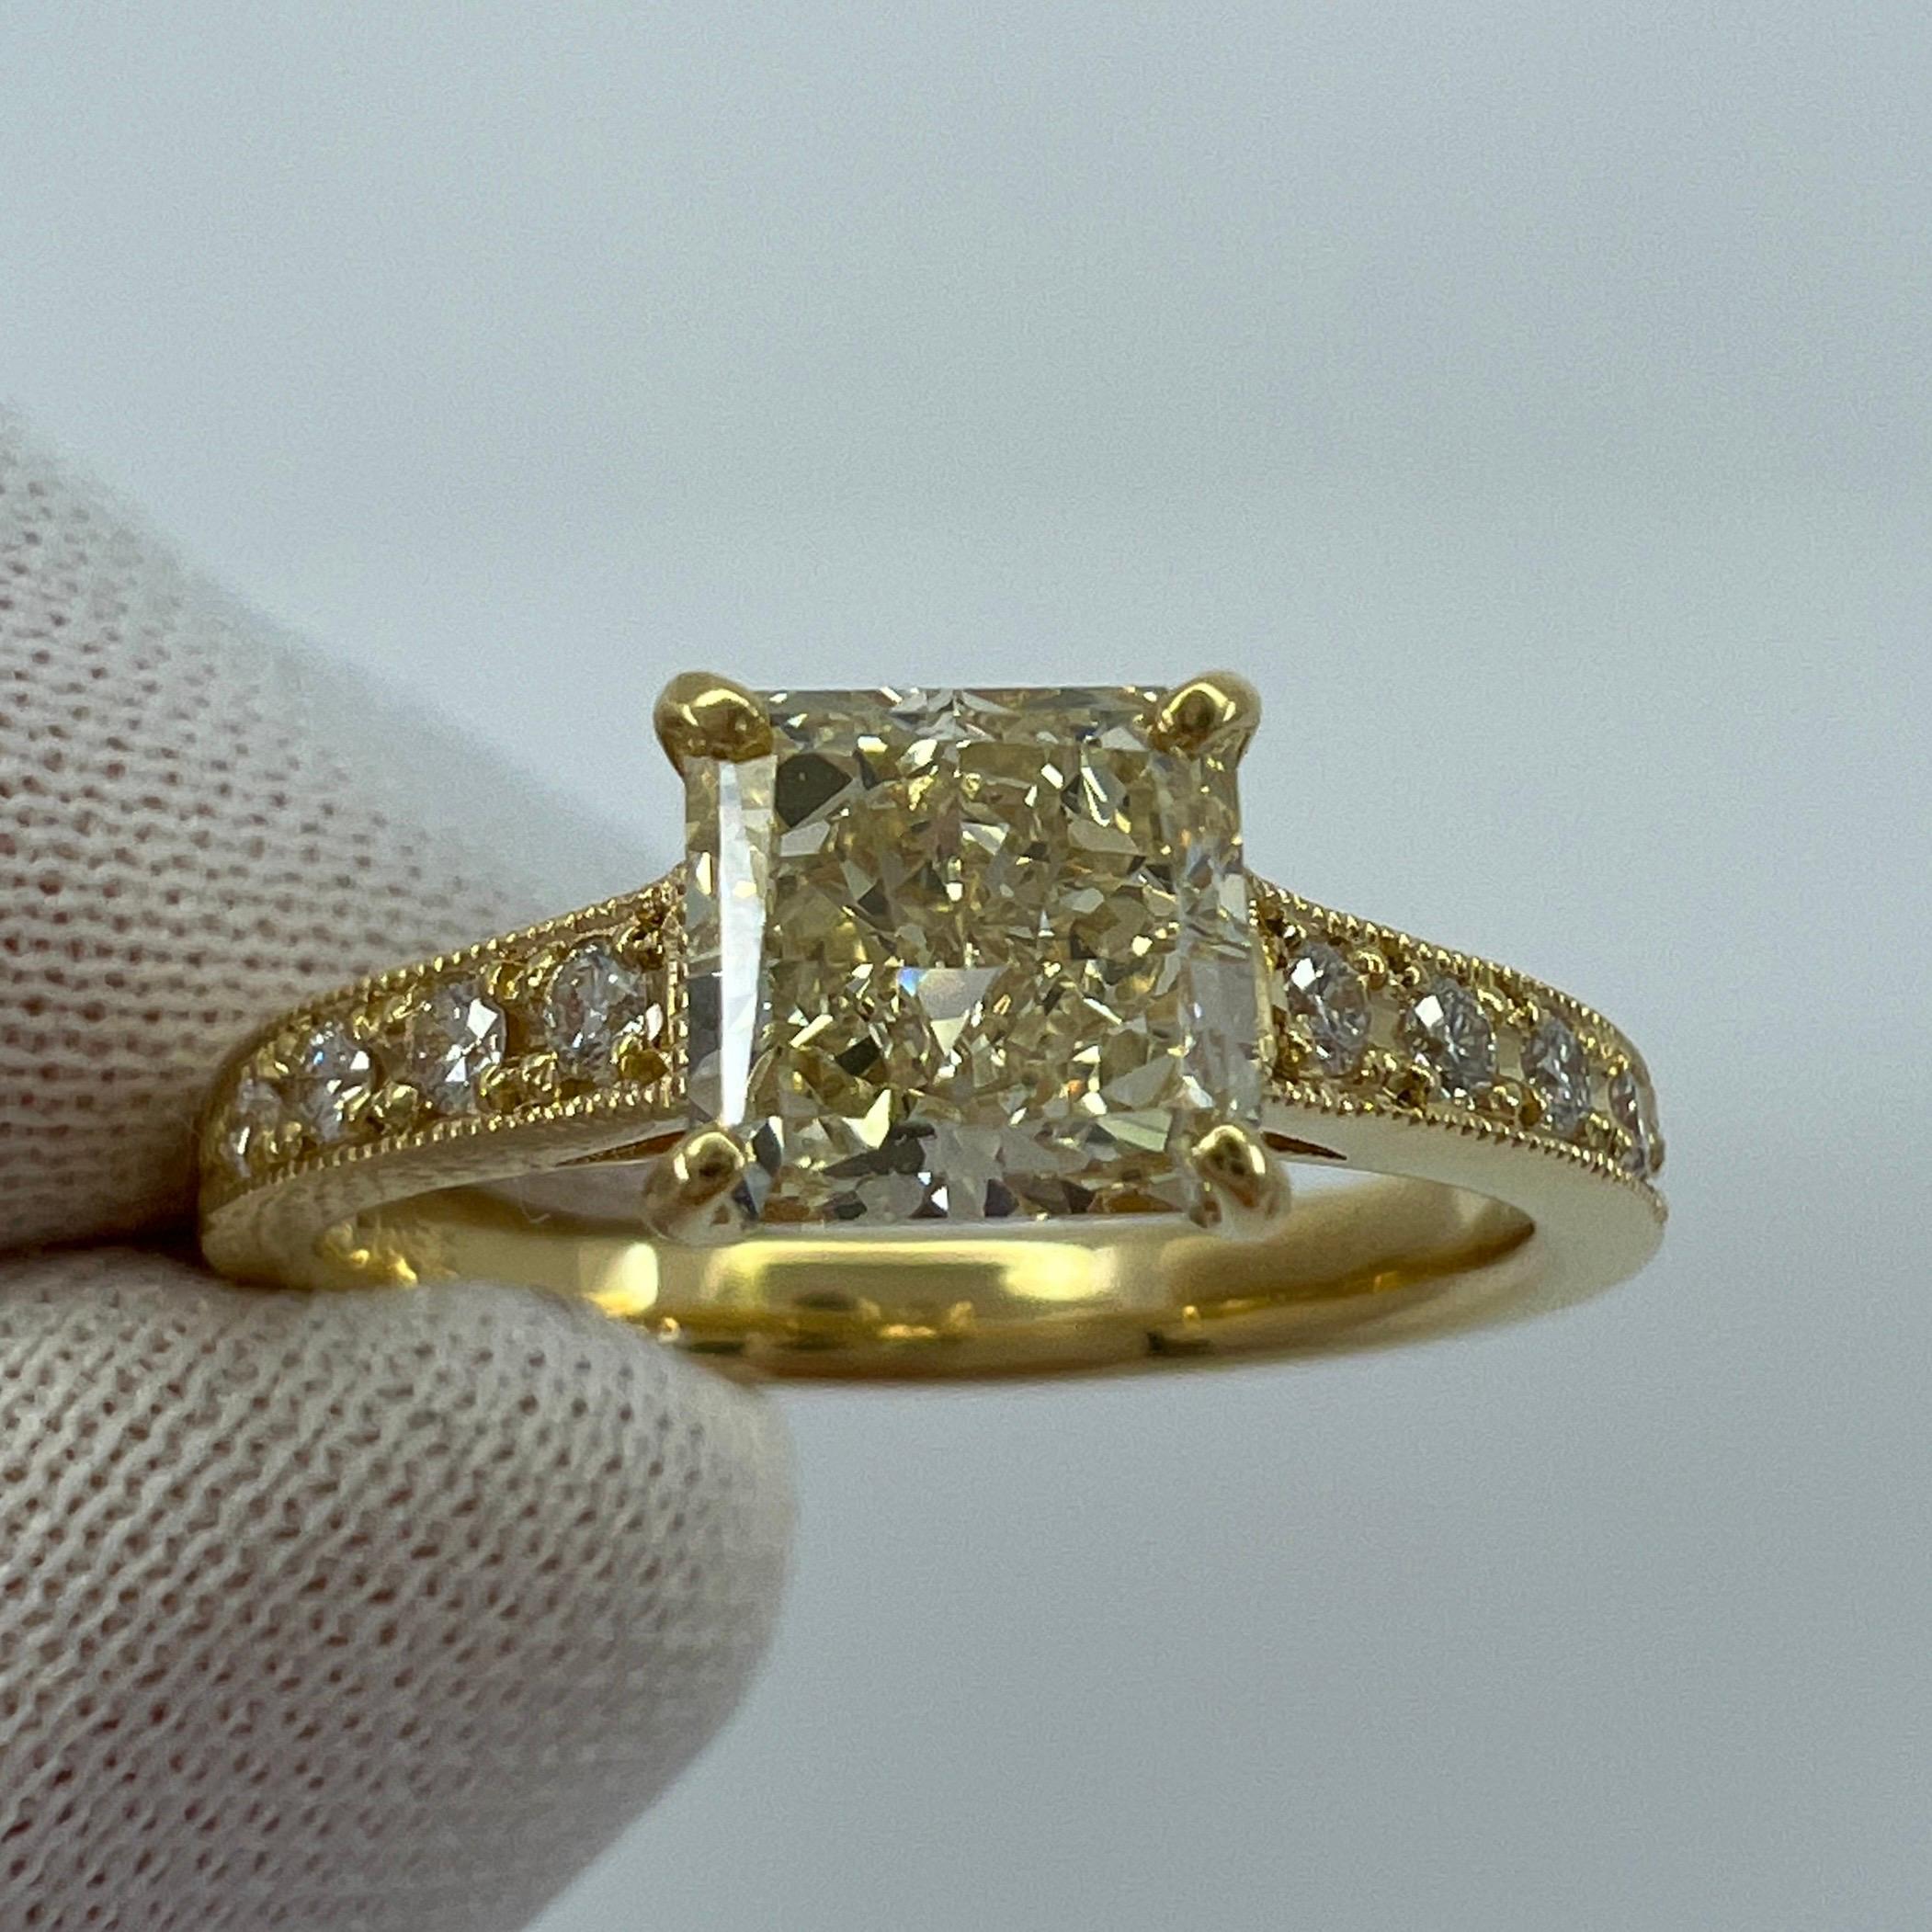 Certified Fancy Light Yellow Cushion Cut Diamond 18k Yellow Gold Ring.

Stunning 1.05ct fancy light yellow untreated diamond set in a beautiful 18k yellow gold ring. Comes with a certificate from the Central Gem Lab of Japan confirming the diamond